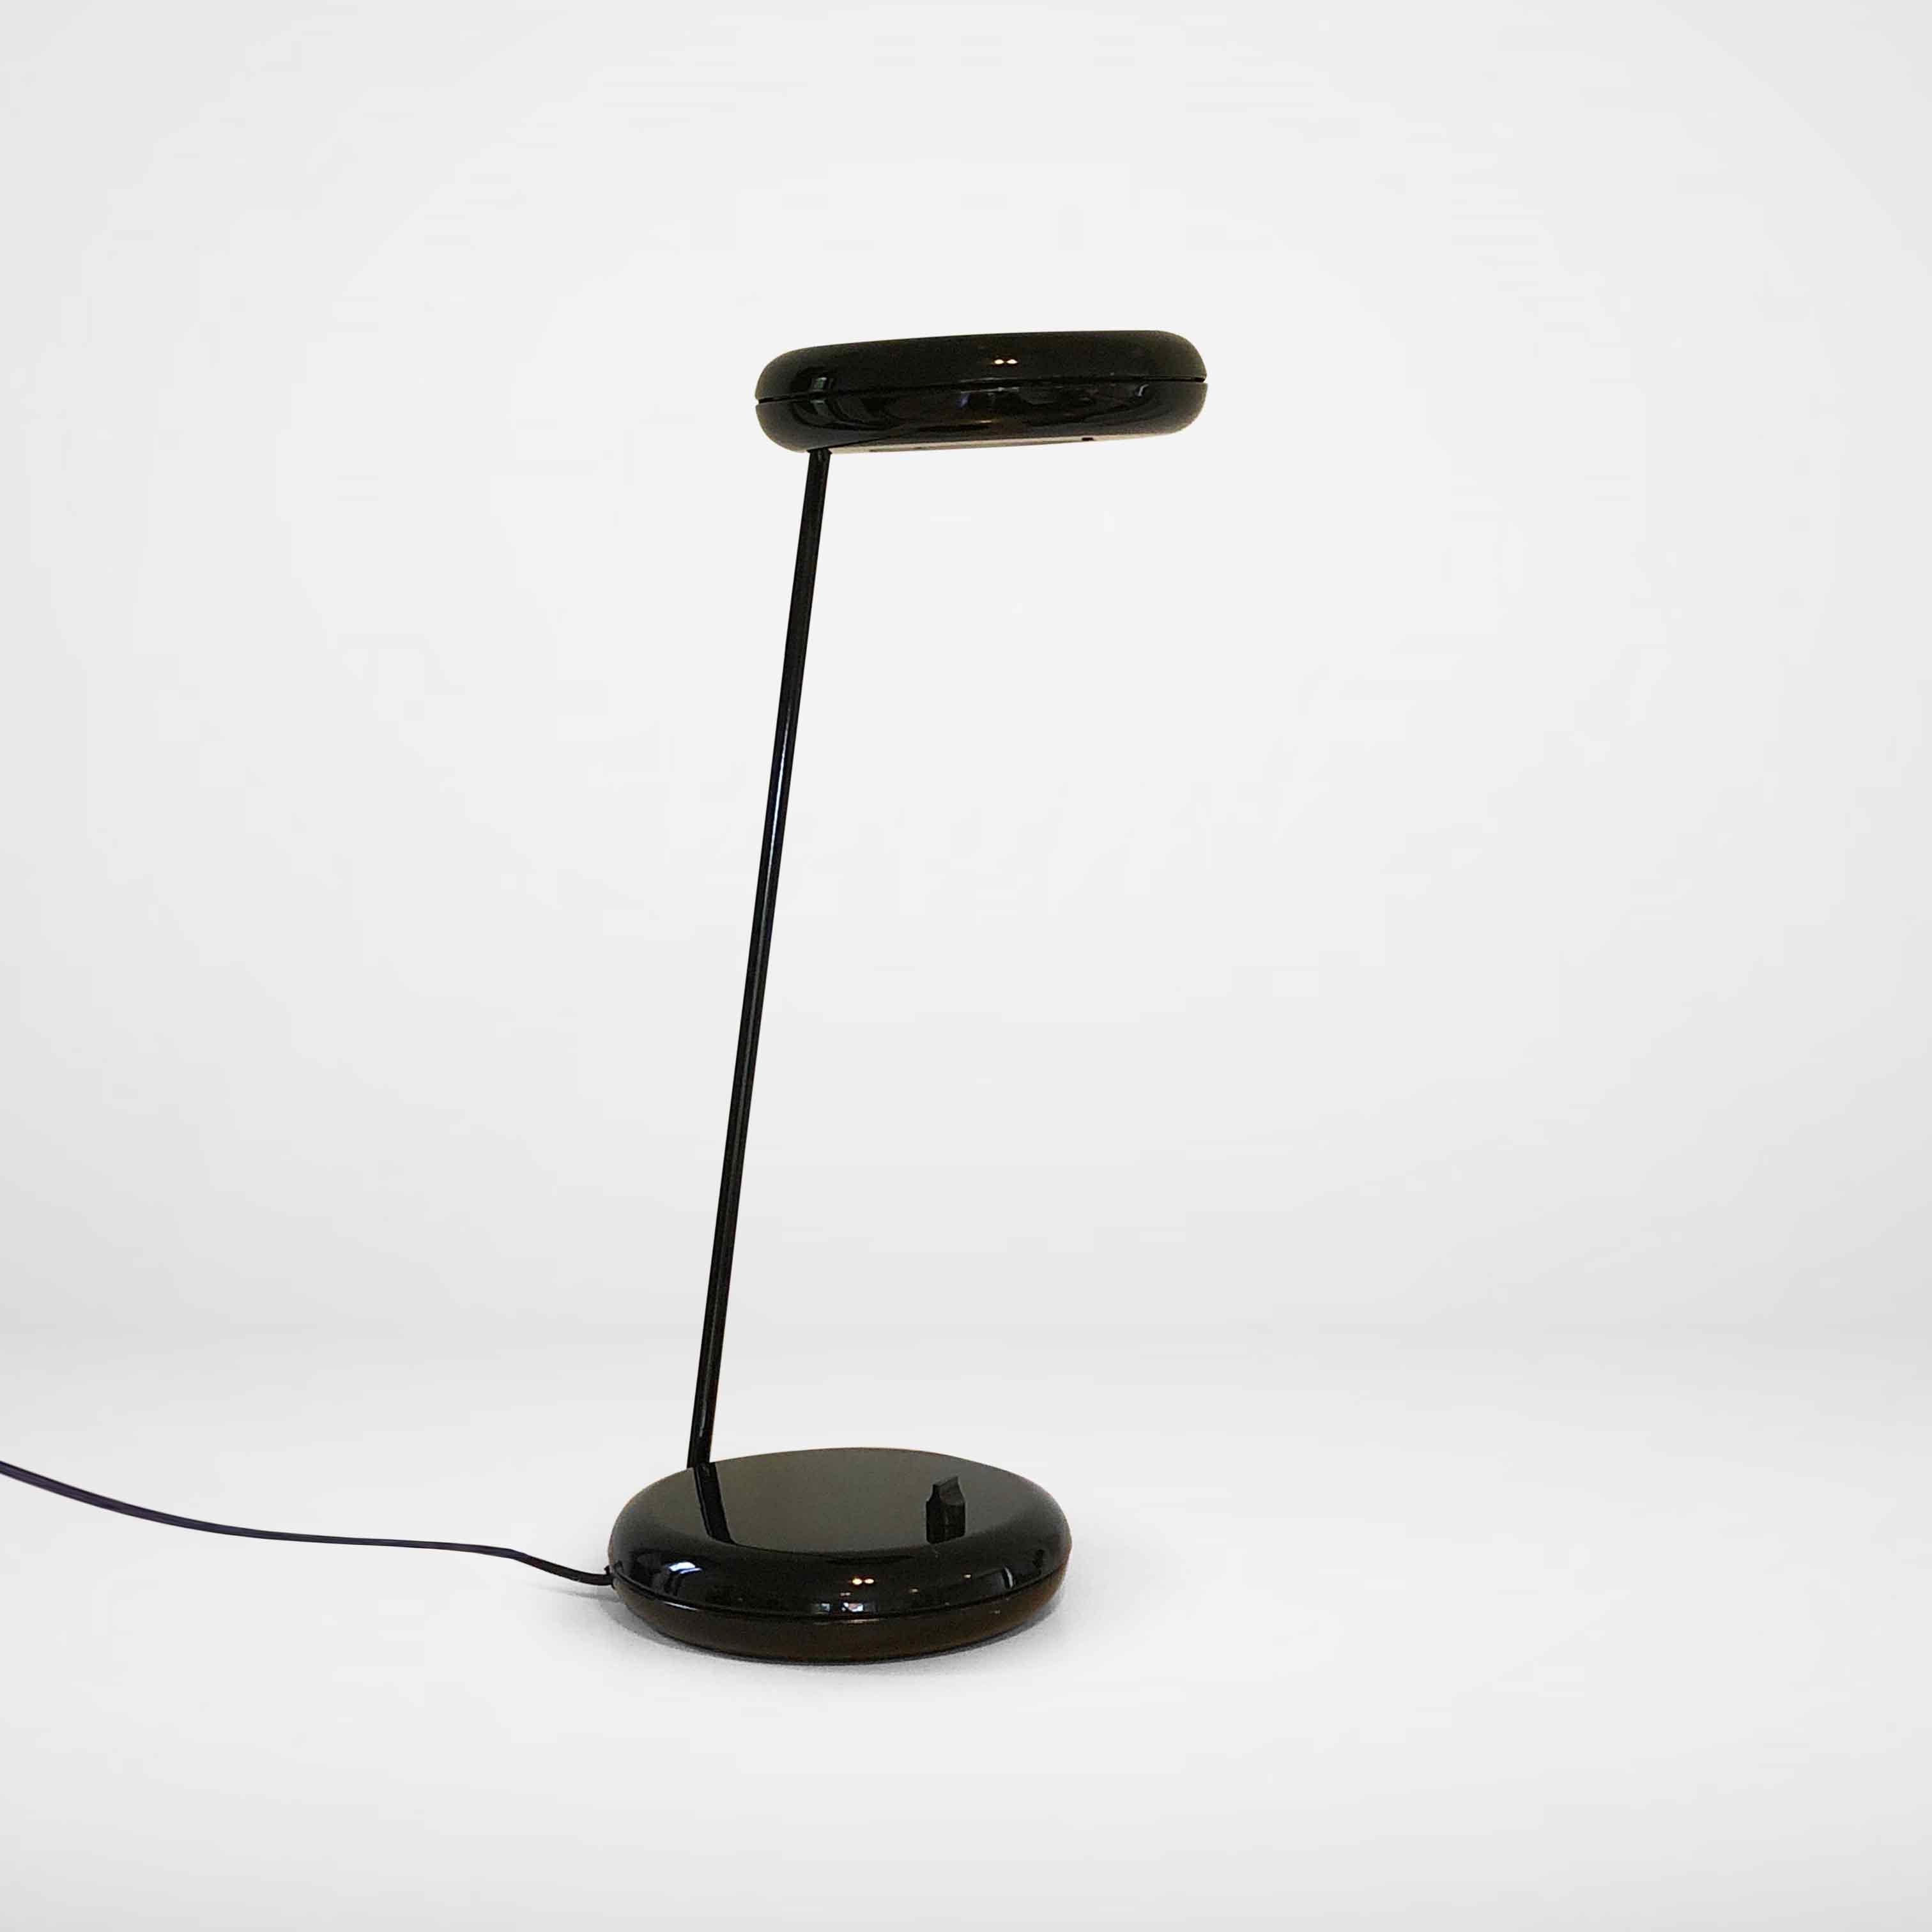 Black desk lamp in the style of Bruno Gecchelin. The arm and the shade can be rotated in different positions so that you can always enjoy optimal light. Because the lamp can be dimmed, you can use it as a mood light or reading lamp. This heavy lamp